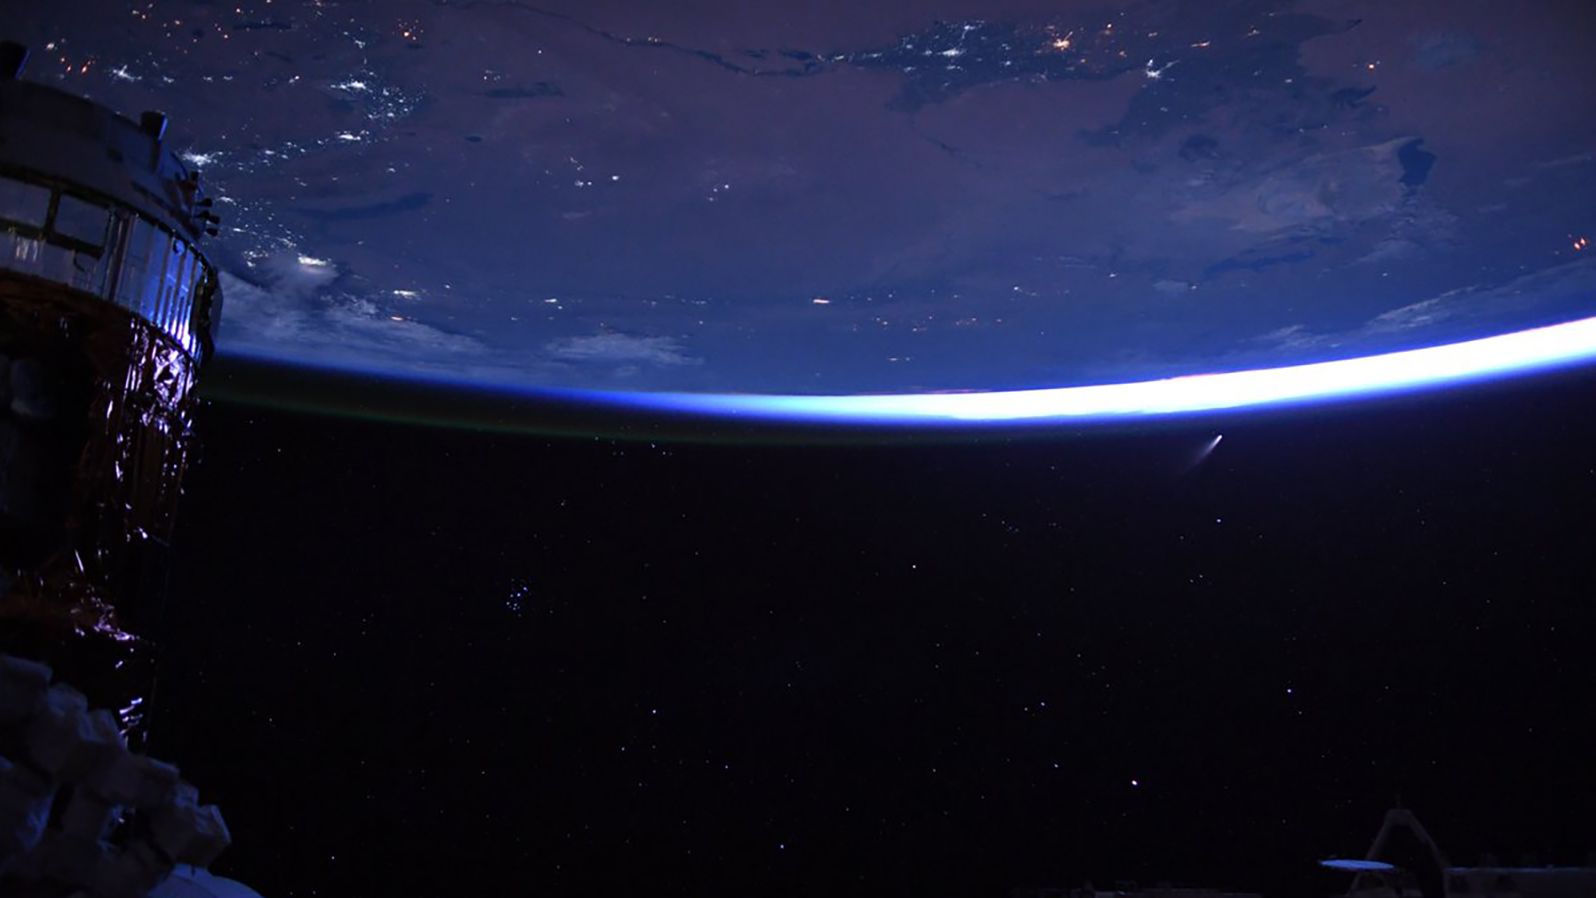 "Night sky, just before dawn from @Space_Station. Stars, cities, spaceships, and a comet!" Behnken wrote on July 9.